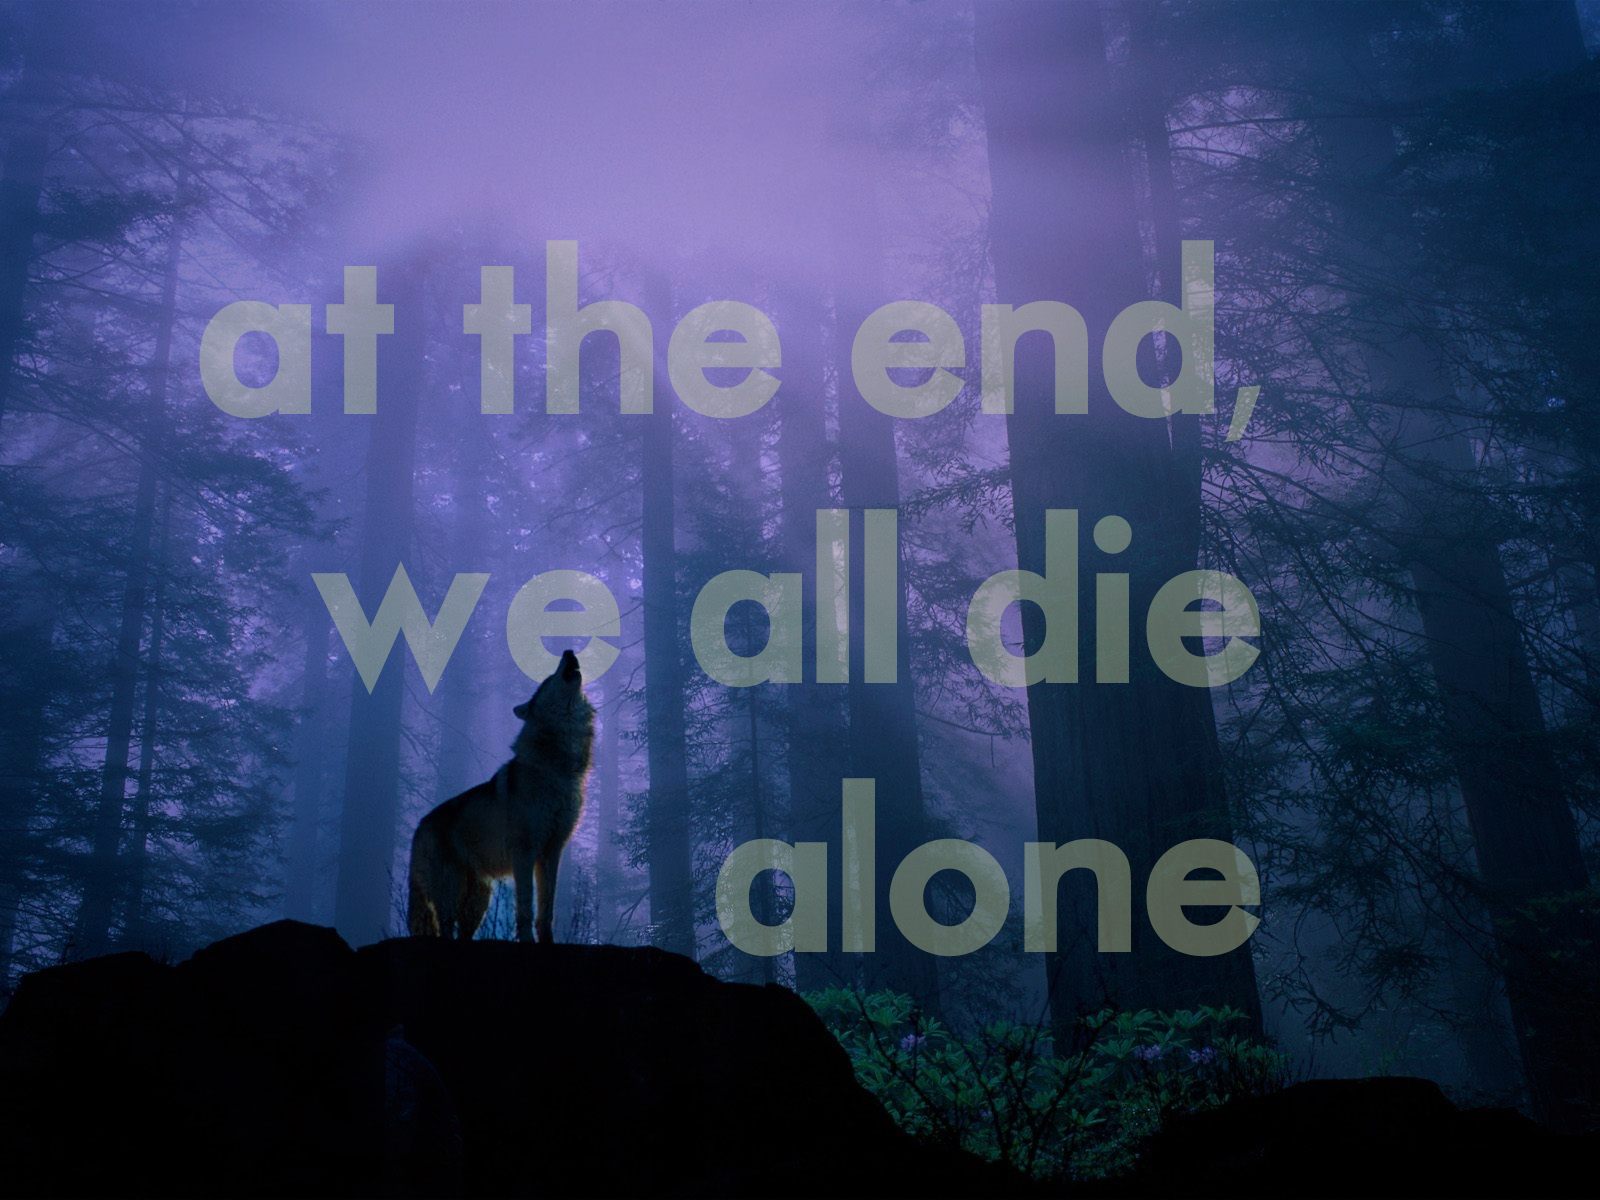 Howling Wolf Quotes. QuotesGram